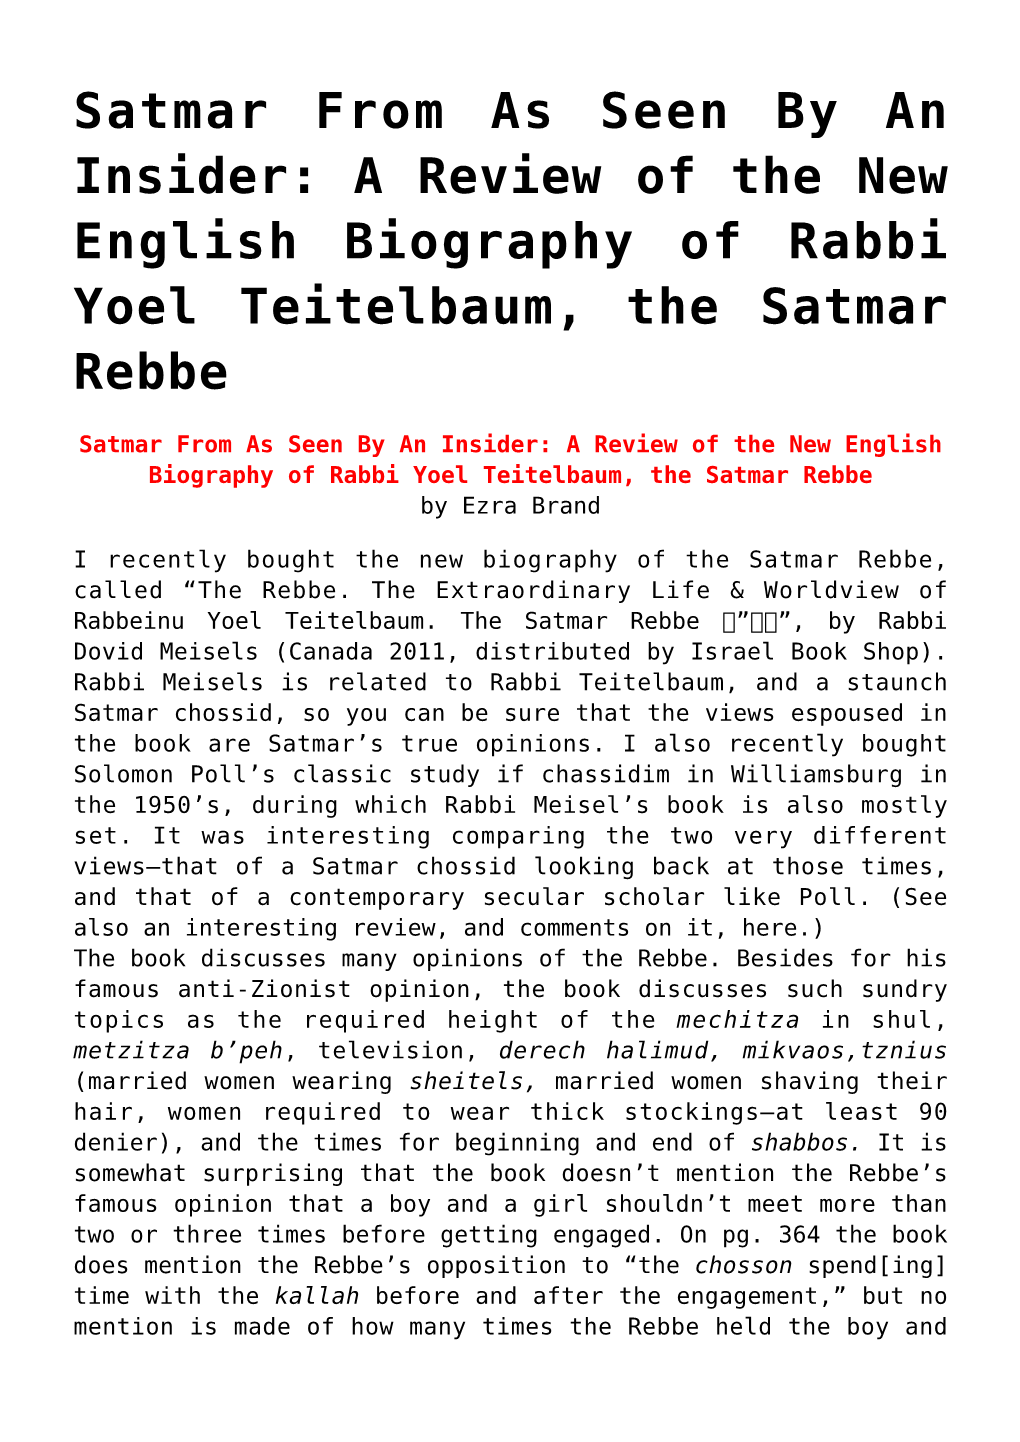 A Review of the New English Biography of Rabbi Yoel Teitelbaum, the Satmar Rebbe